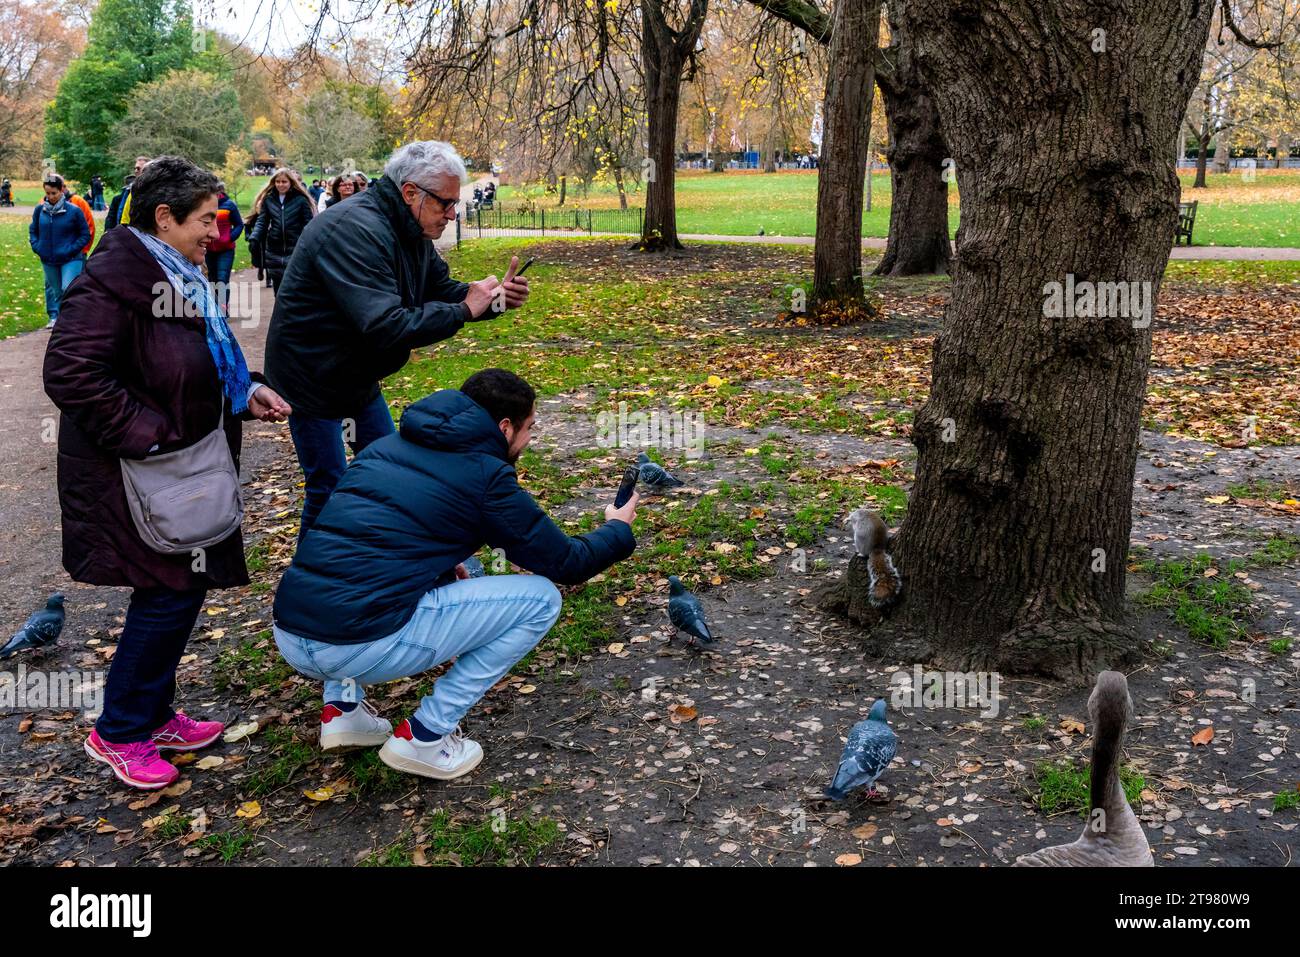 Visitors Taking Photos Of A Squirrel In St James's Park, London, UK Stock Photo